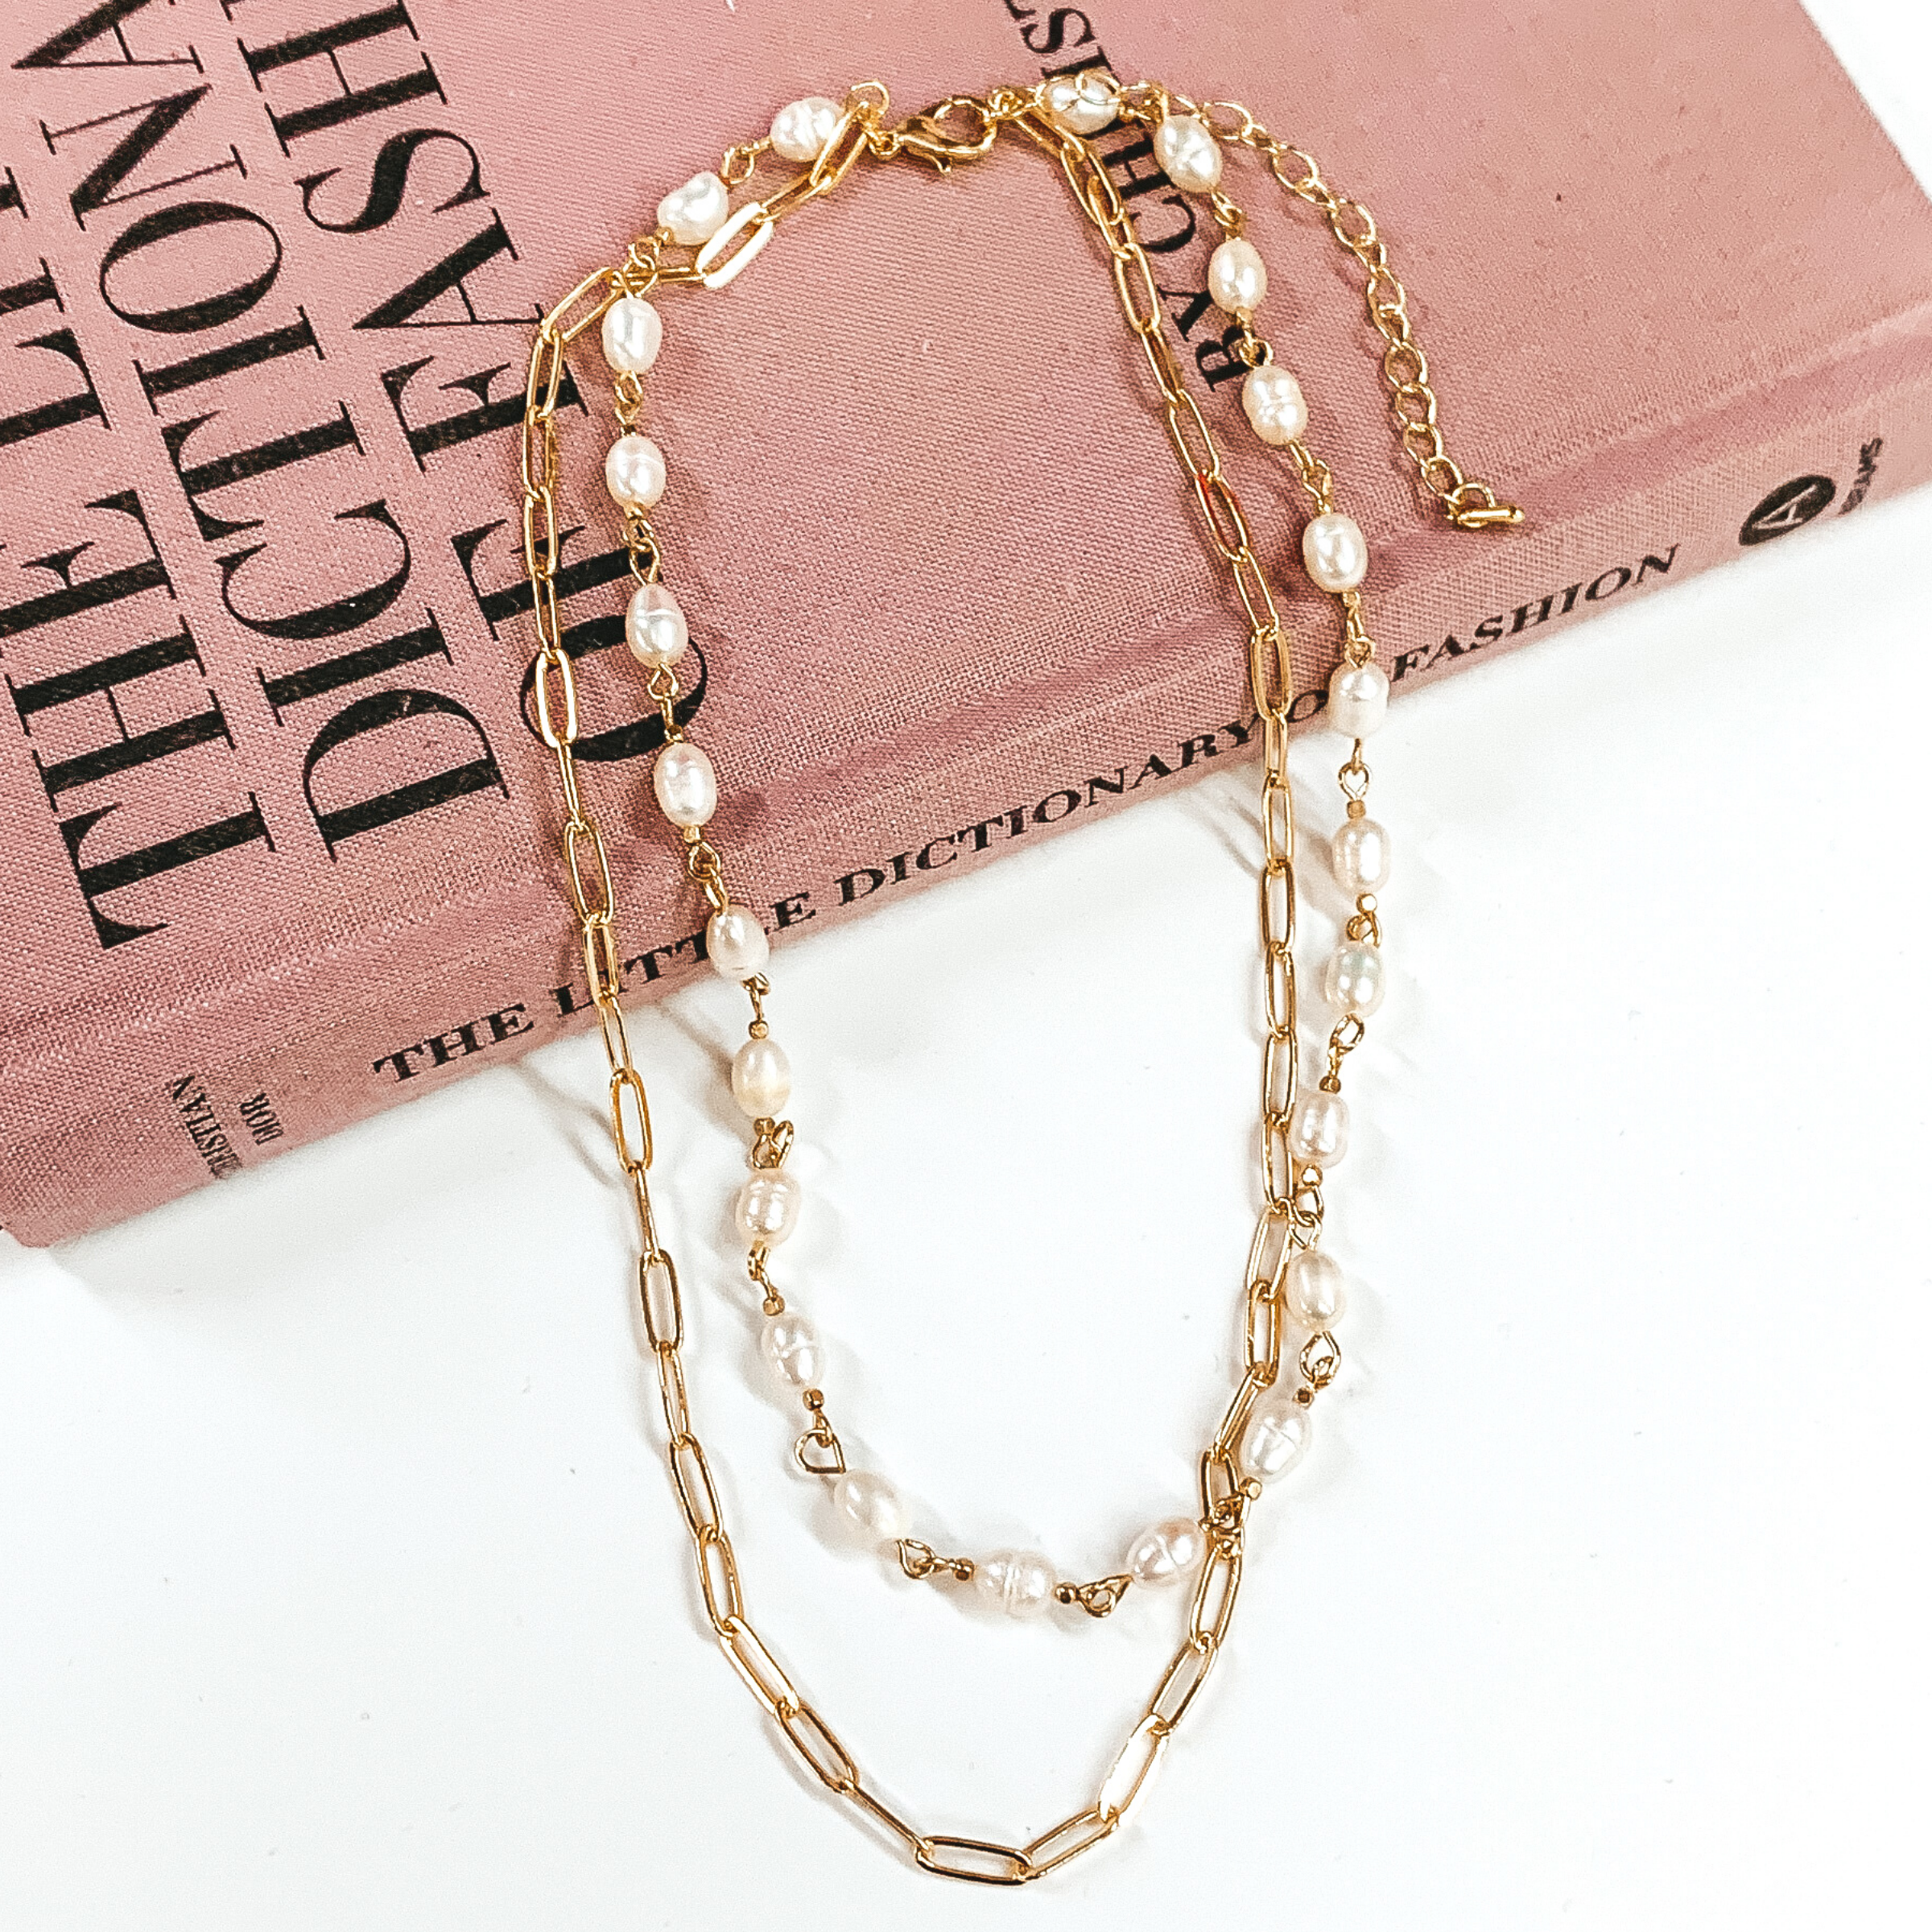 Gold, double layered necklace. One strand is a gold paperclip chain and the second strand is a white pearl beaded linked chain. This necklace is pictured laying partially on a mauve colored book on a white background. 